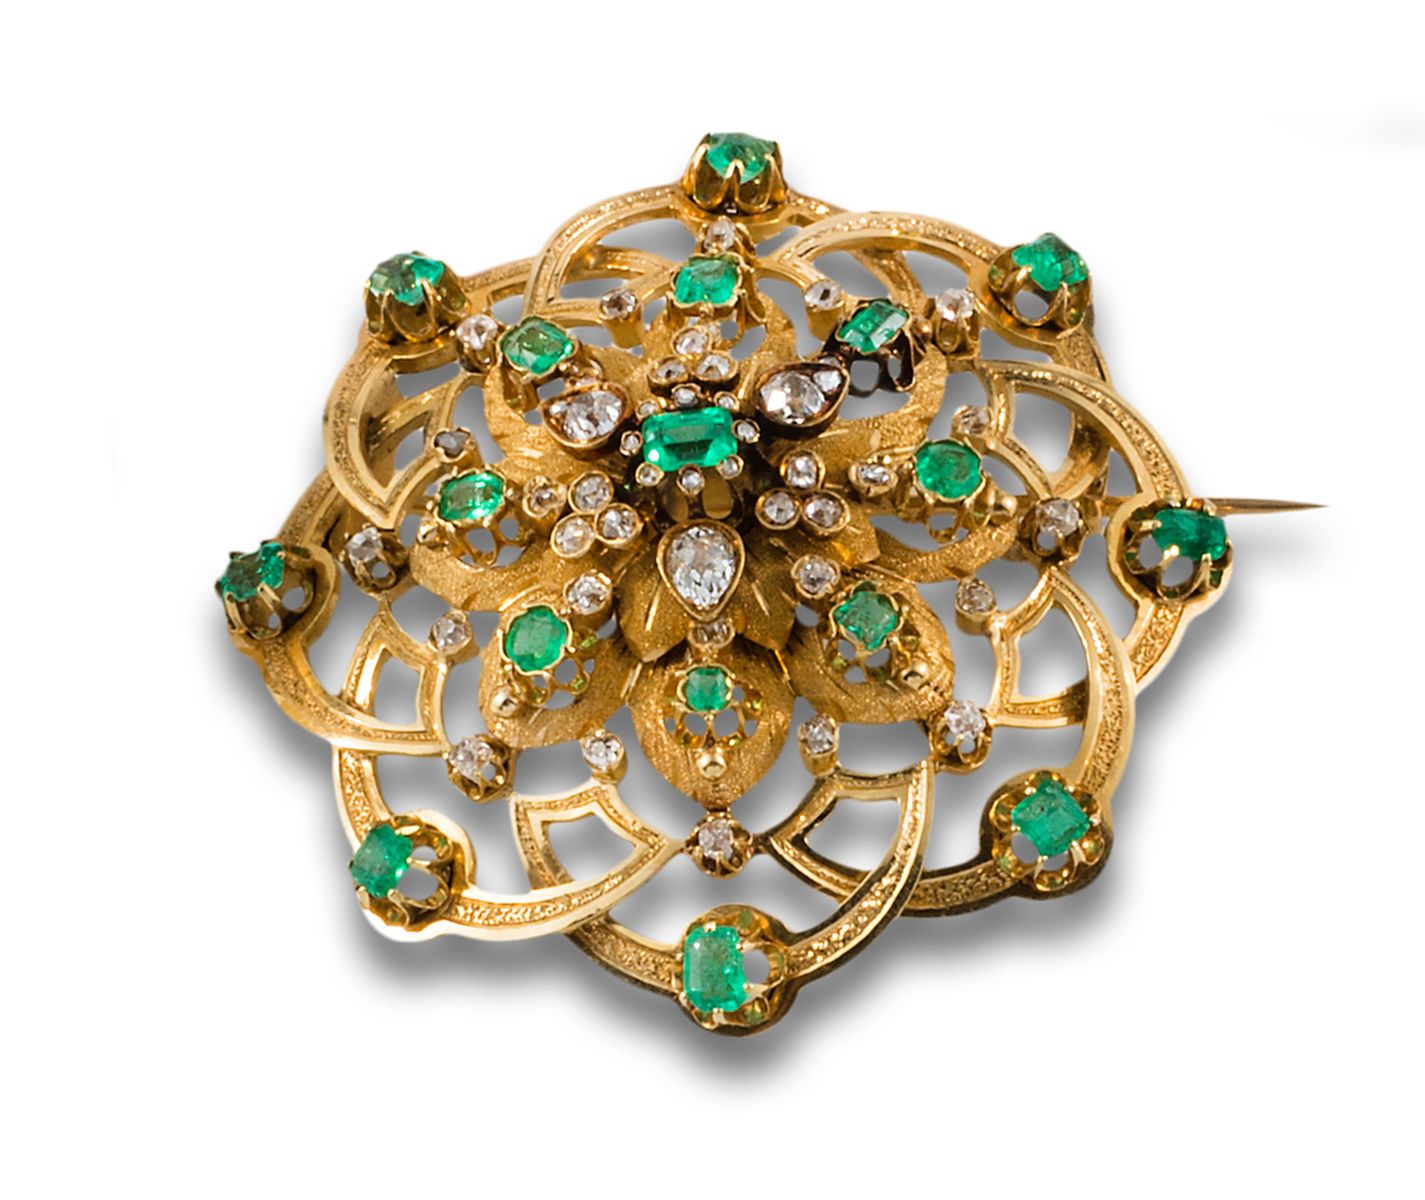 Mid-19th century brooch in 18 kt yellow gold. Formed by openwork in the shape of&hellip;